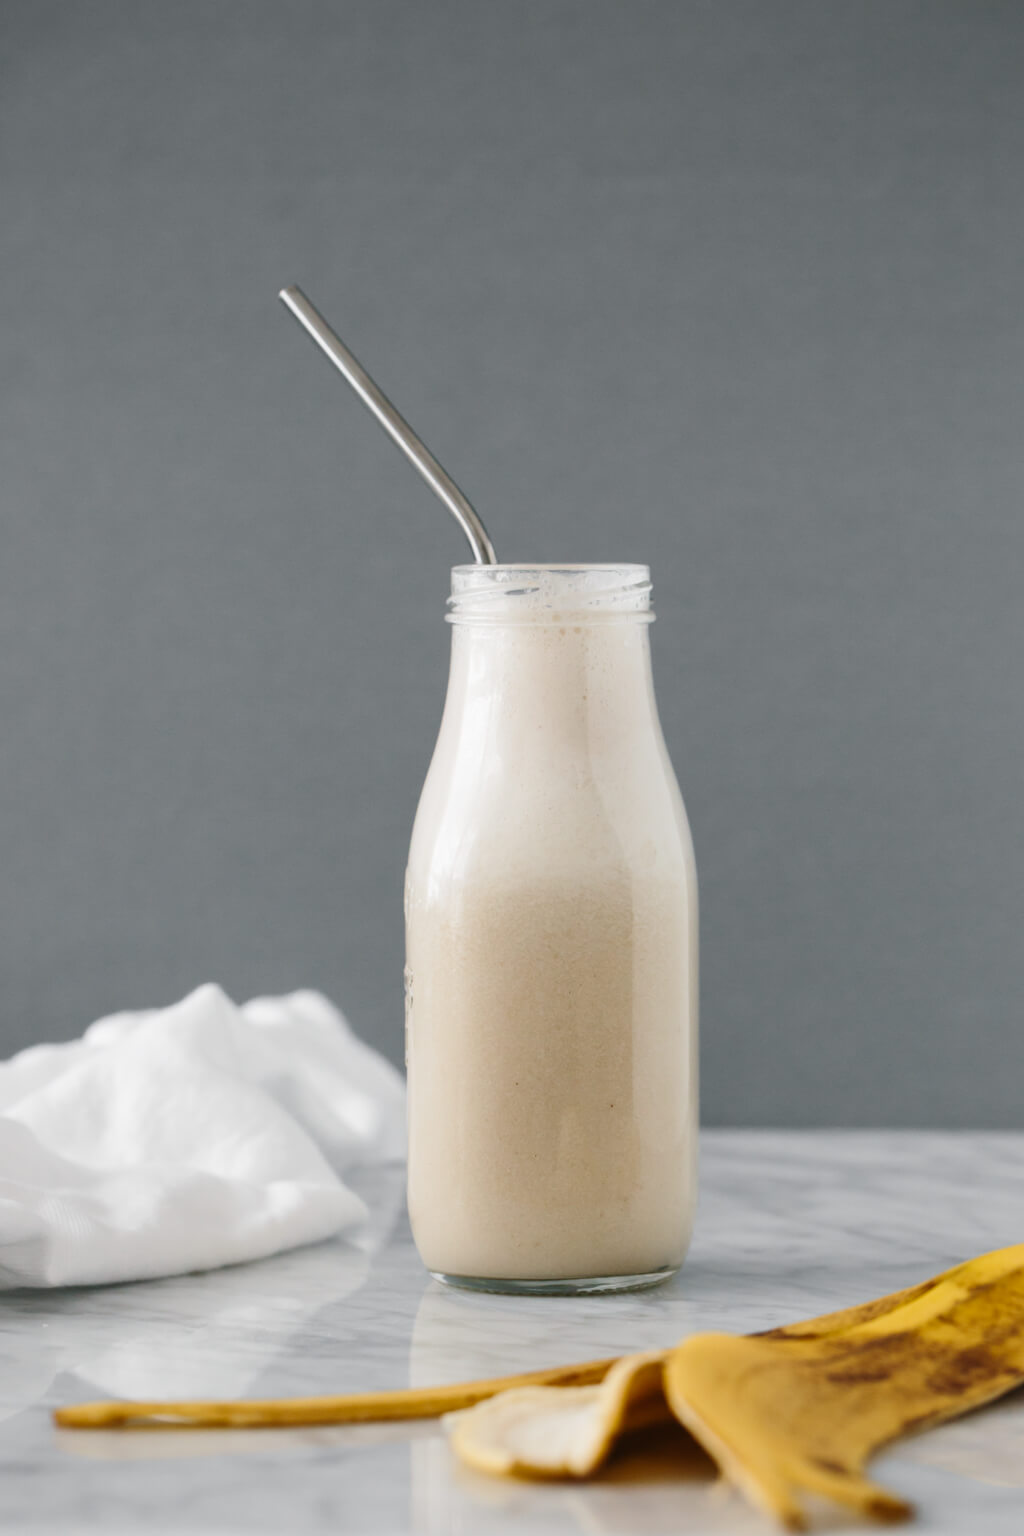 10 Alternative Milk Recipes To Try If You're Cutting Down On Dairy